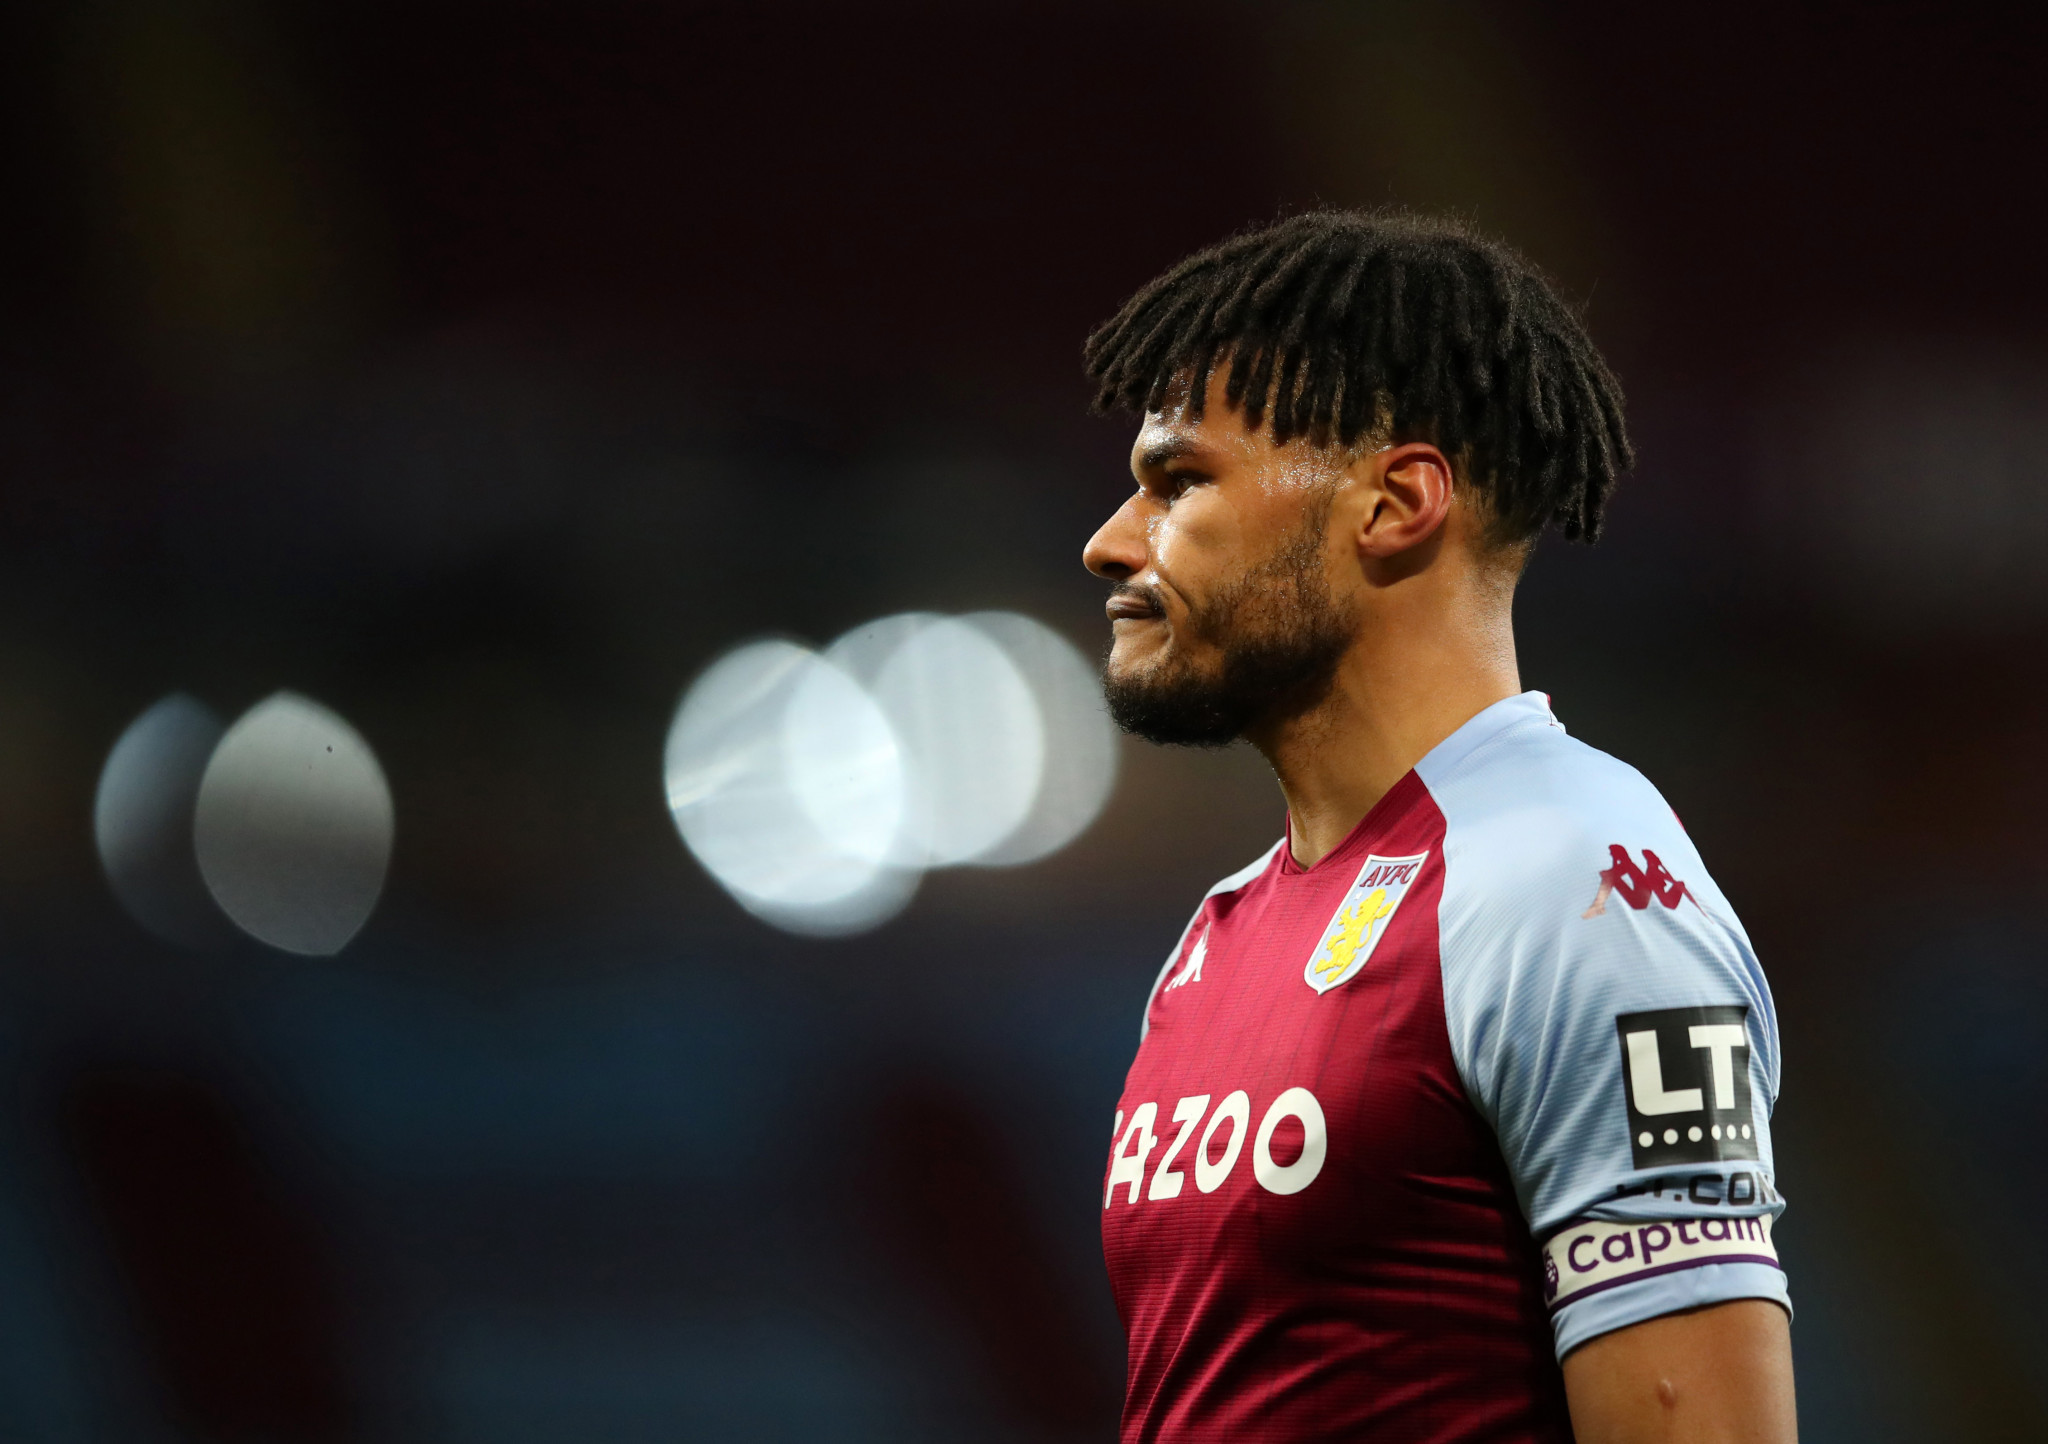 Tyrone Mings is one of many players who have received racial abuse online ©Getty Images